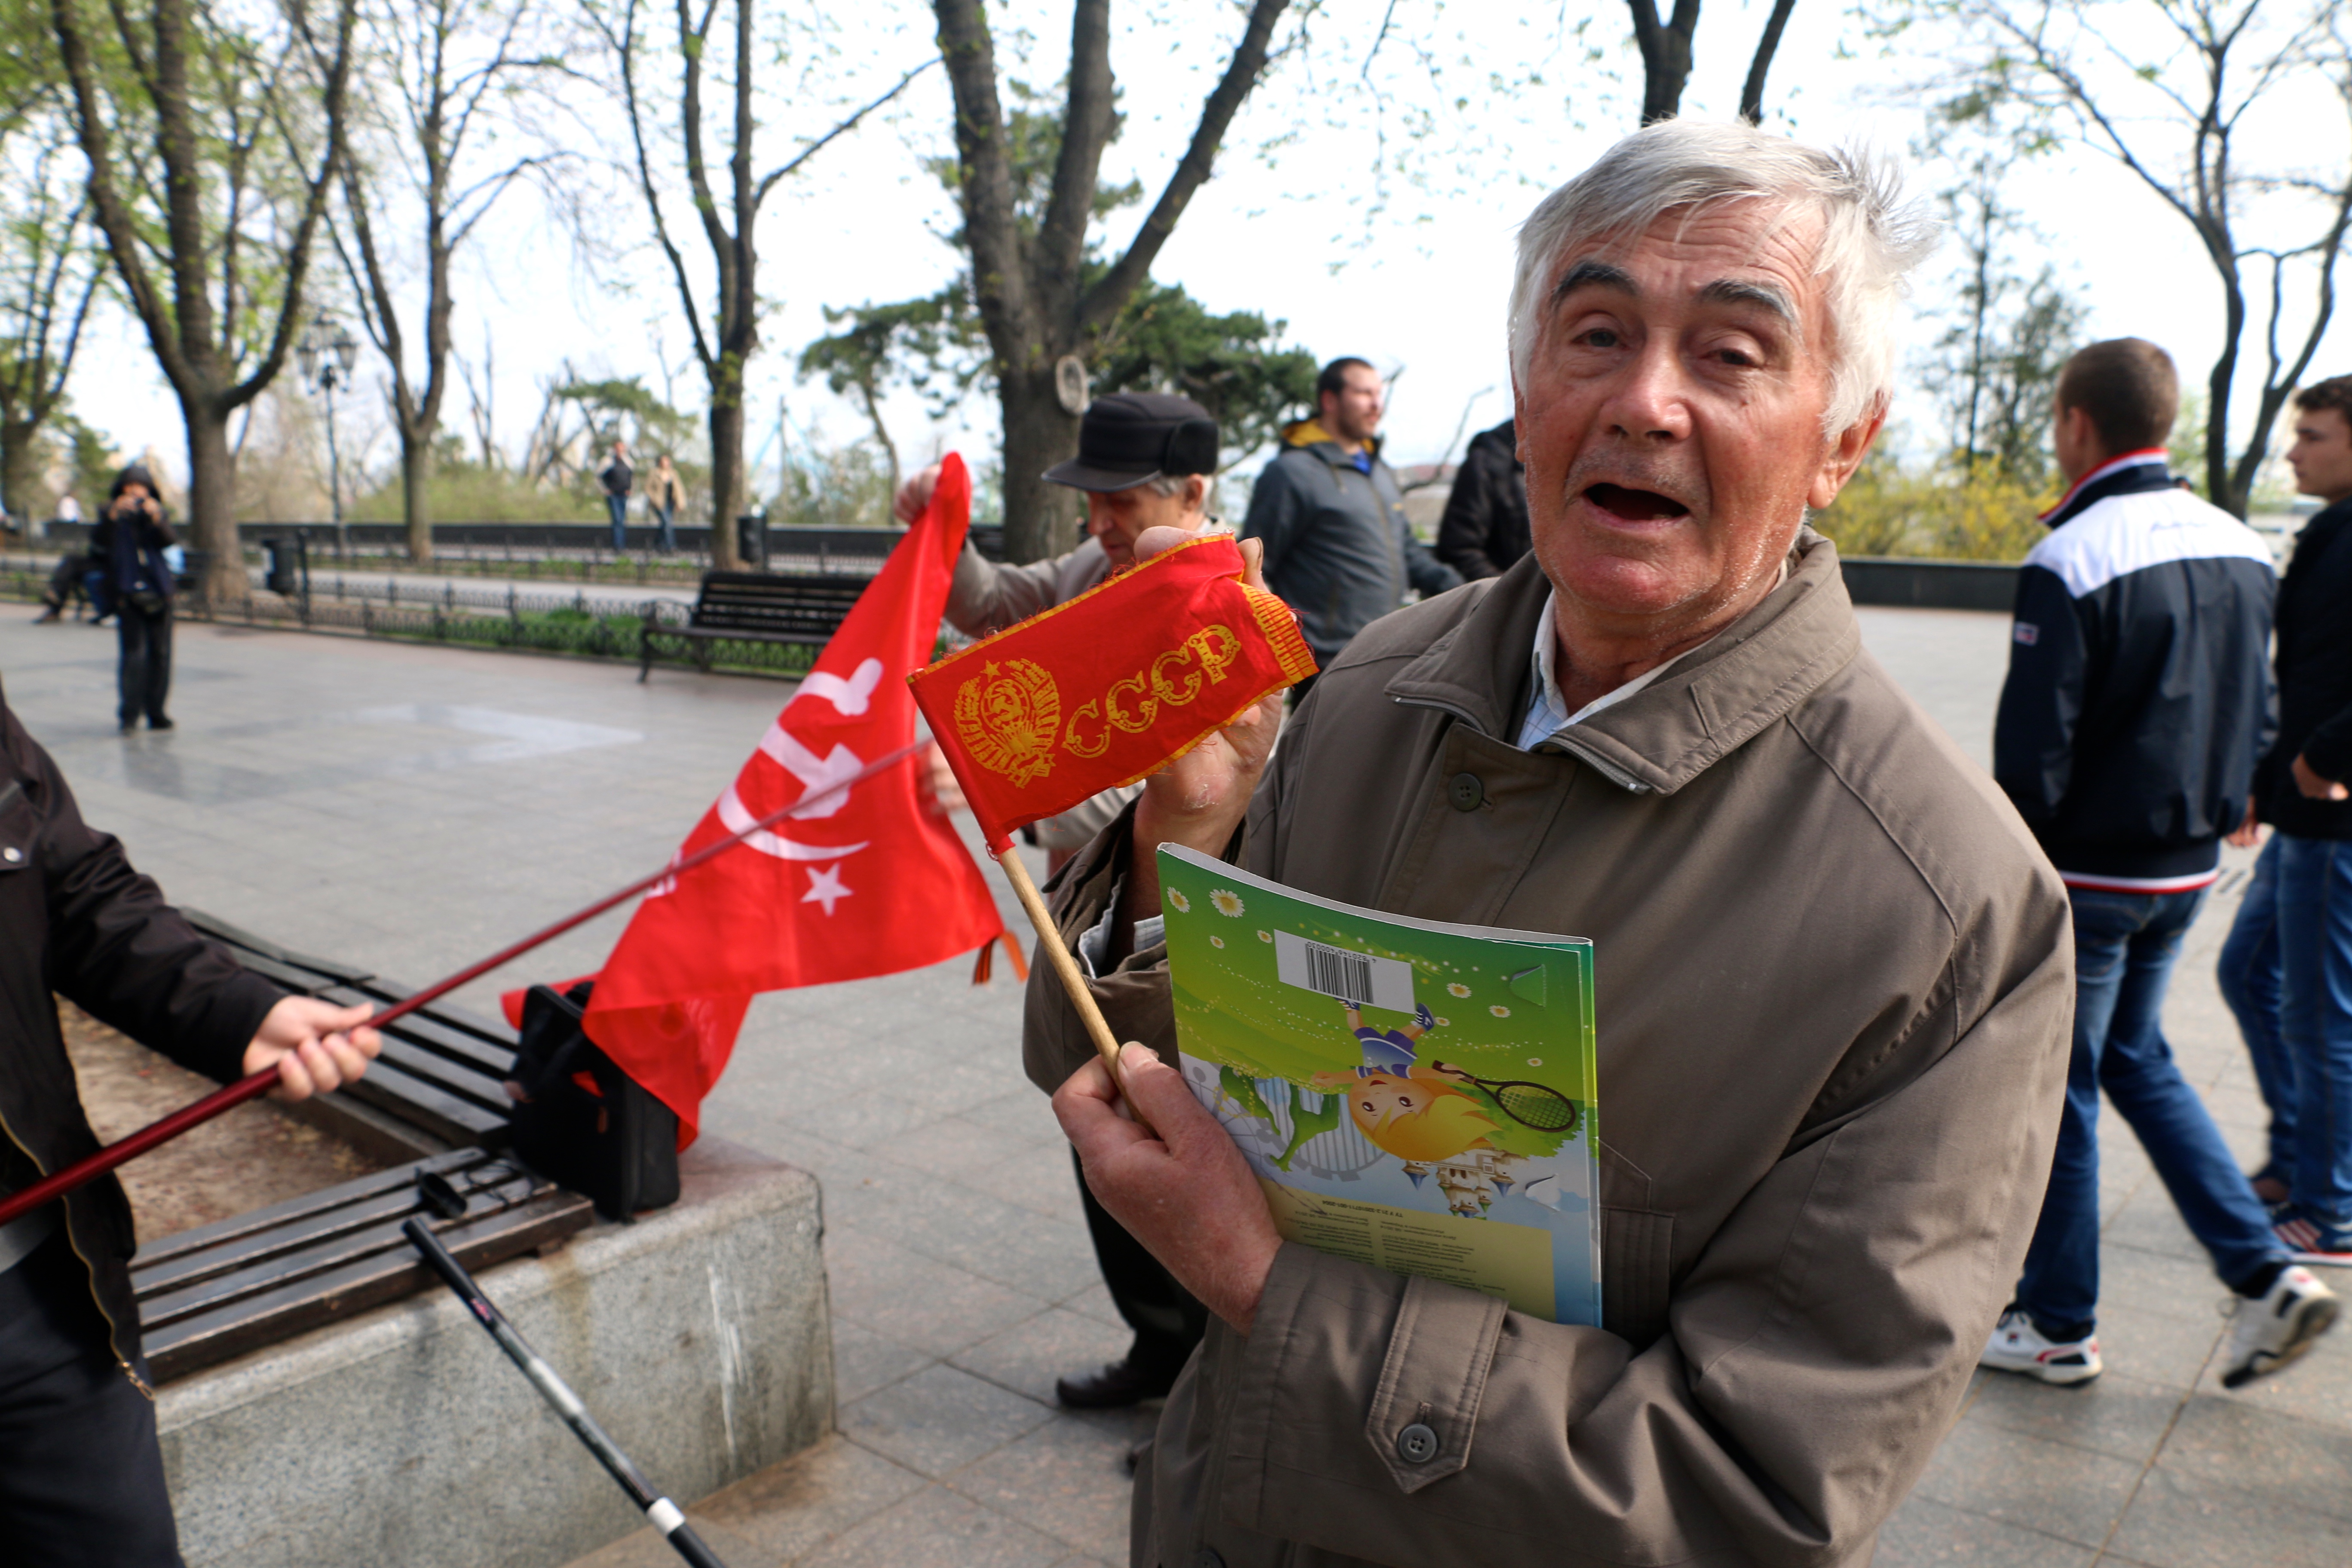 A Communist Party member with a Soviet flag in Odessa, Ukraine. (Photo: Nolan Peterson/The Daily Signal)